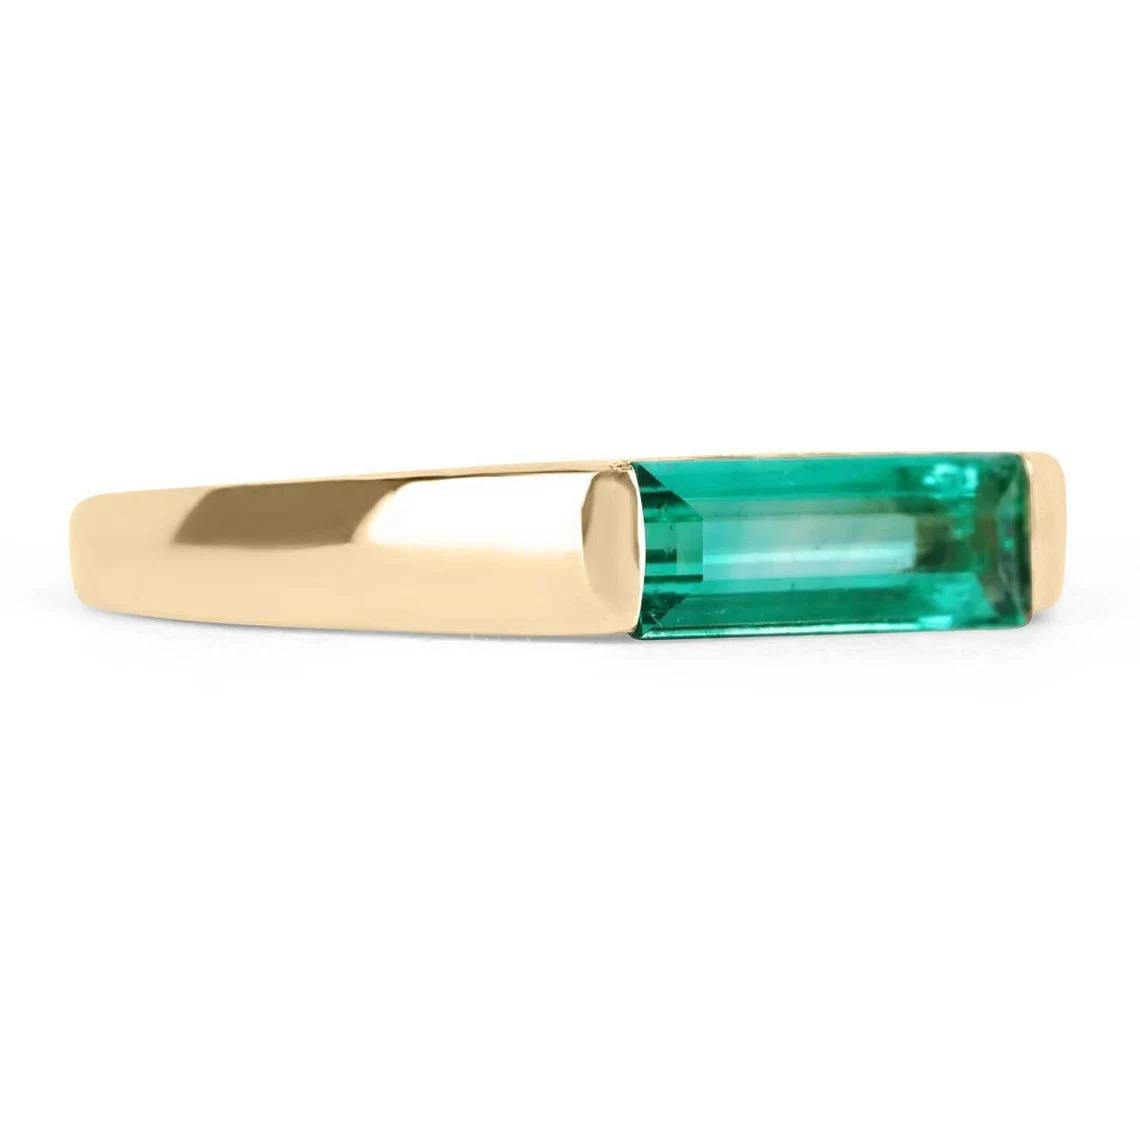 Exceptional and unique, this is an 18K Colombian emerald wedding or stacking band. The emerald band features an excellent and minimalist design for full admiration of the stellar baguette-cut emerald. Securely tension-set, perfectly slender emerald